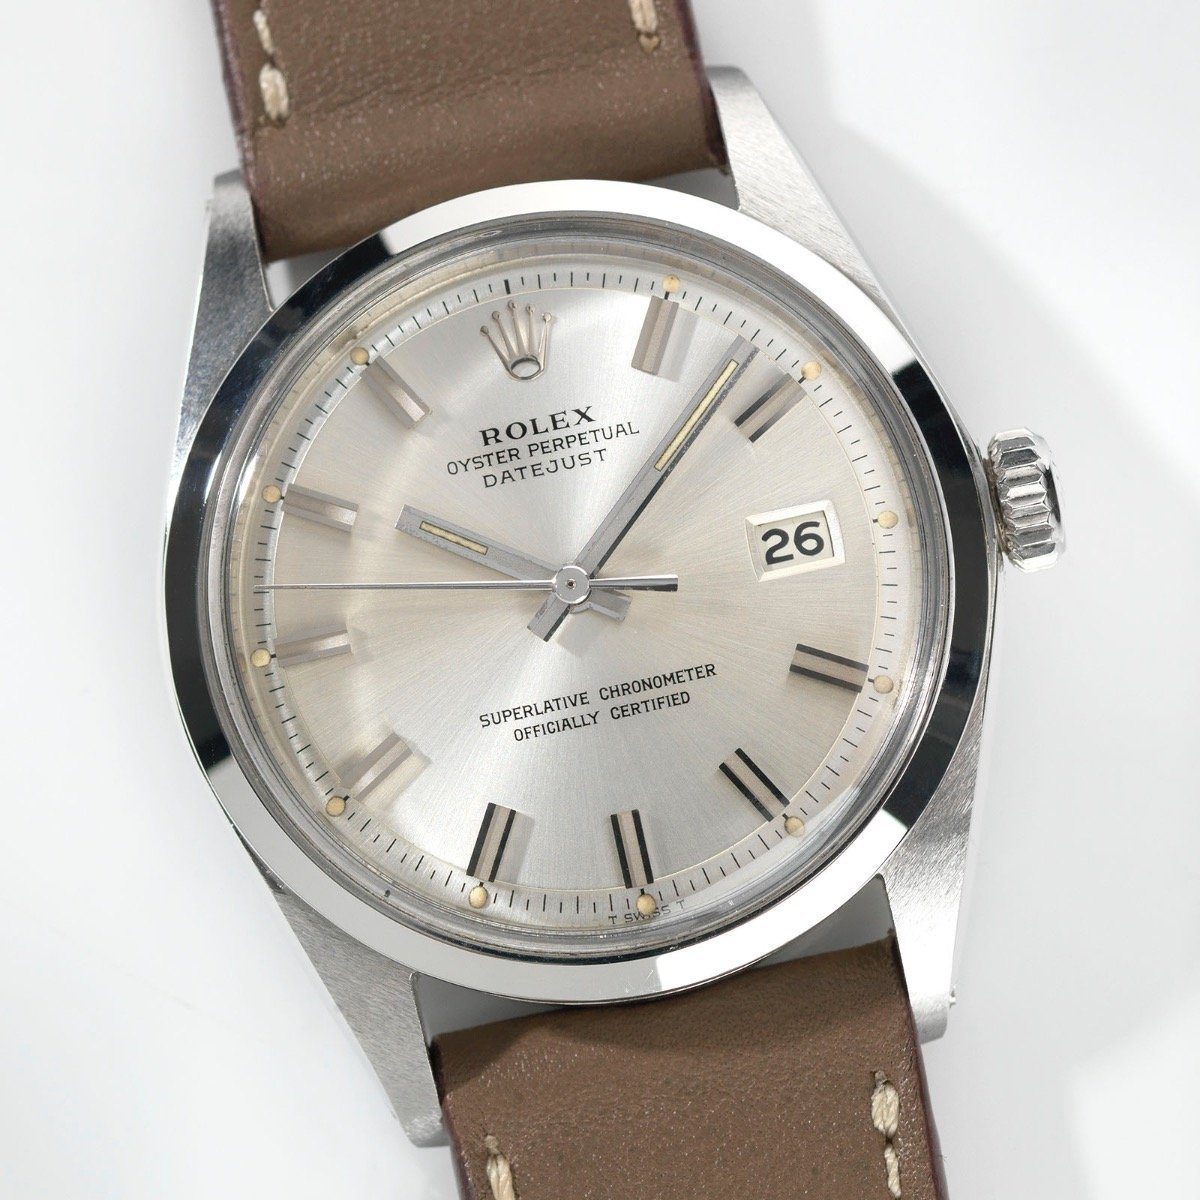 Rolex Datejust Wide Boy Dial Reference 1600